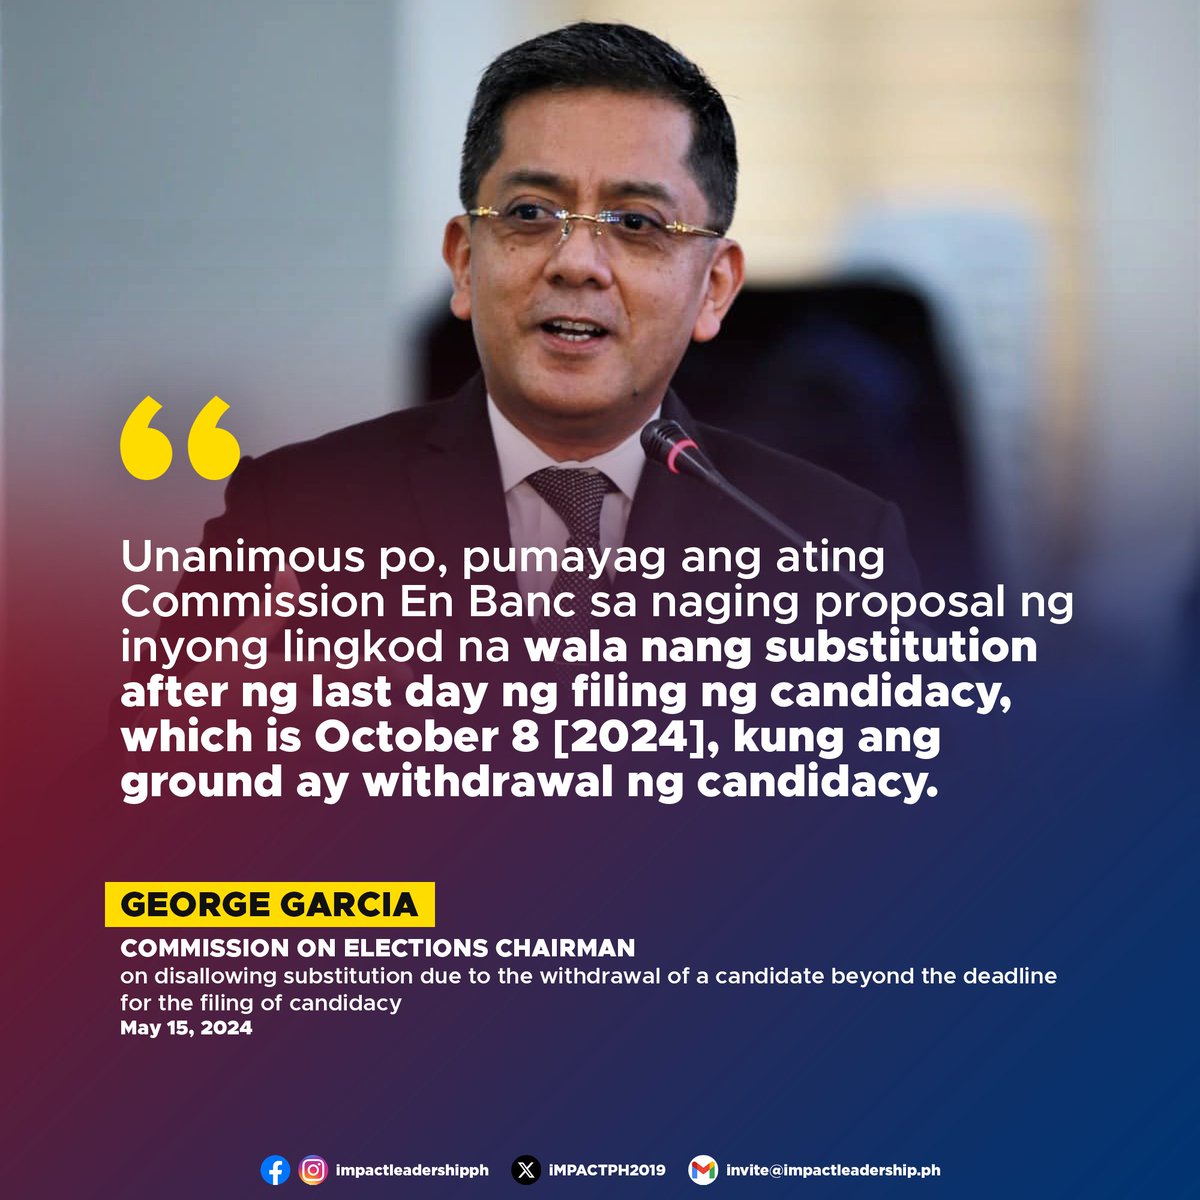 'WALA NANG SUBSTITUTION KUNG ANG GROUND AY WITHDRAWAL NG CANDIDACY' COMELEC Chairman George Garcia announces that the COMELEC En Banc unanimously approved his proposal to prohibit substitutions after October 8, 2024, if the reason is withdrawal of candidacy. #Halalan2025